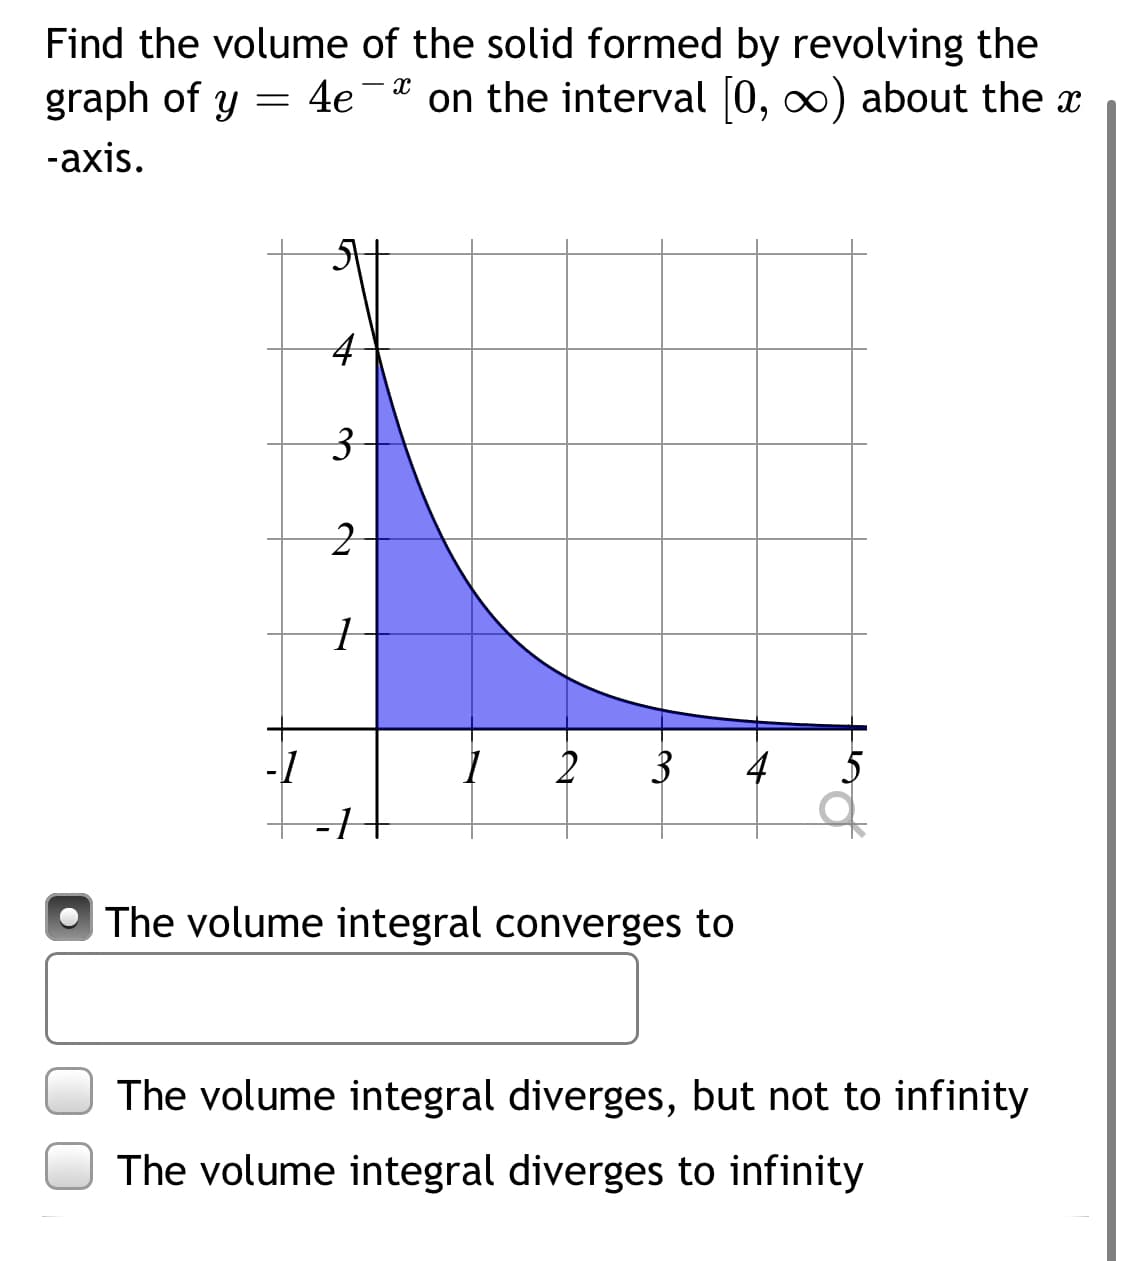 Find the volume of the solid formed by revolving the
graph of y = 4e-* on the interval 0, o) about the x
-axis.
3
-1
2
3
4
5
The volume integral converges to
The volume integral diverges, but not to infinity
The volume integral diverges to infinity
